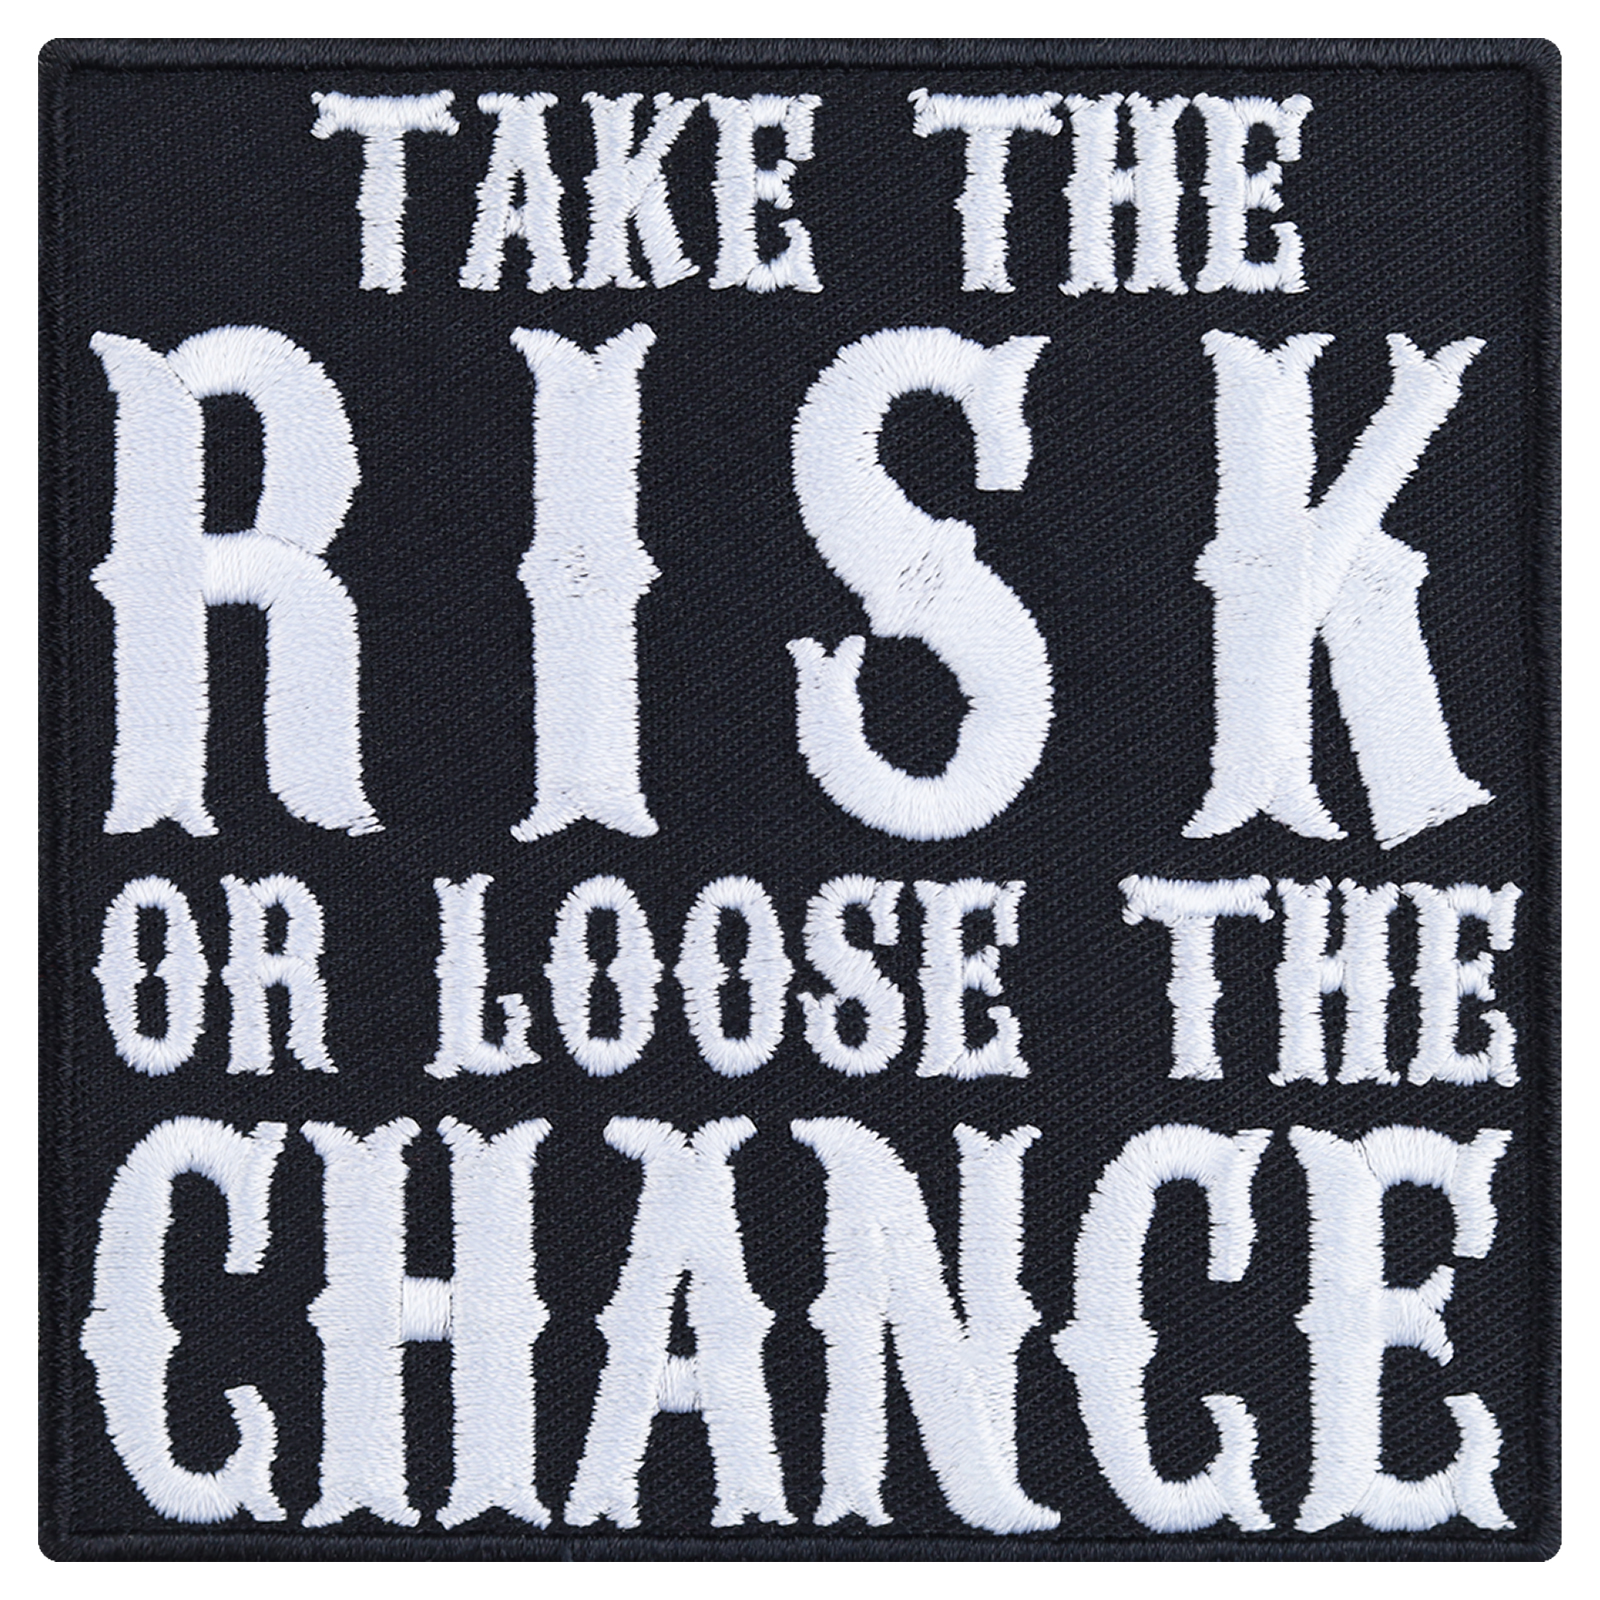 Take the risk or loose the chance - Patch